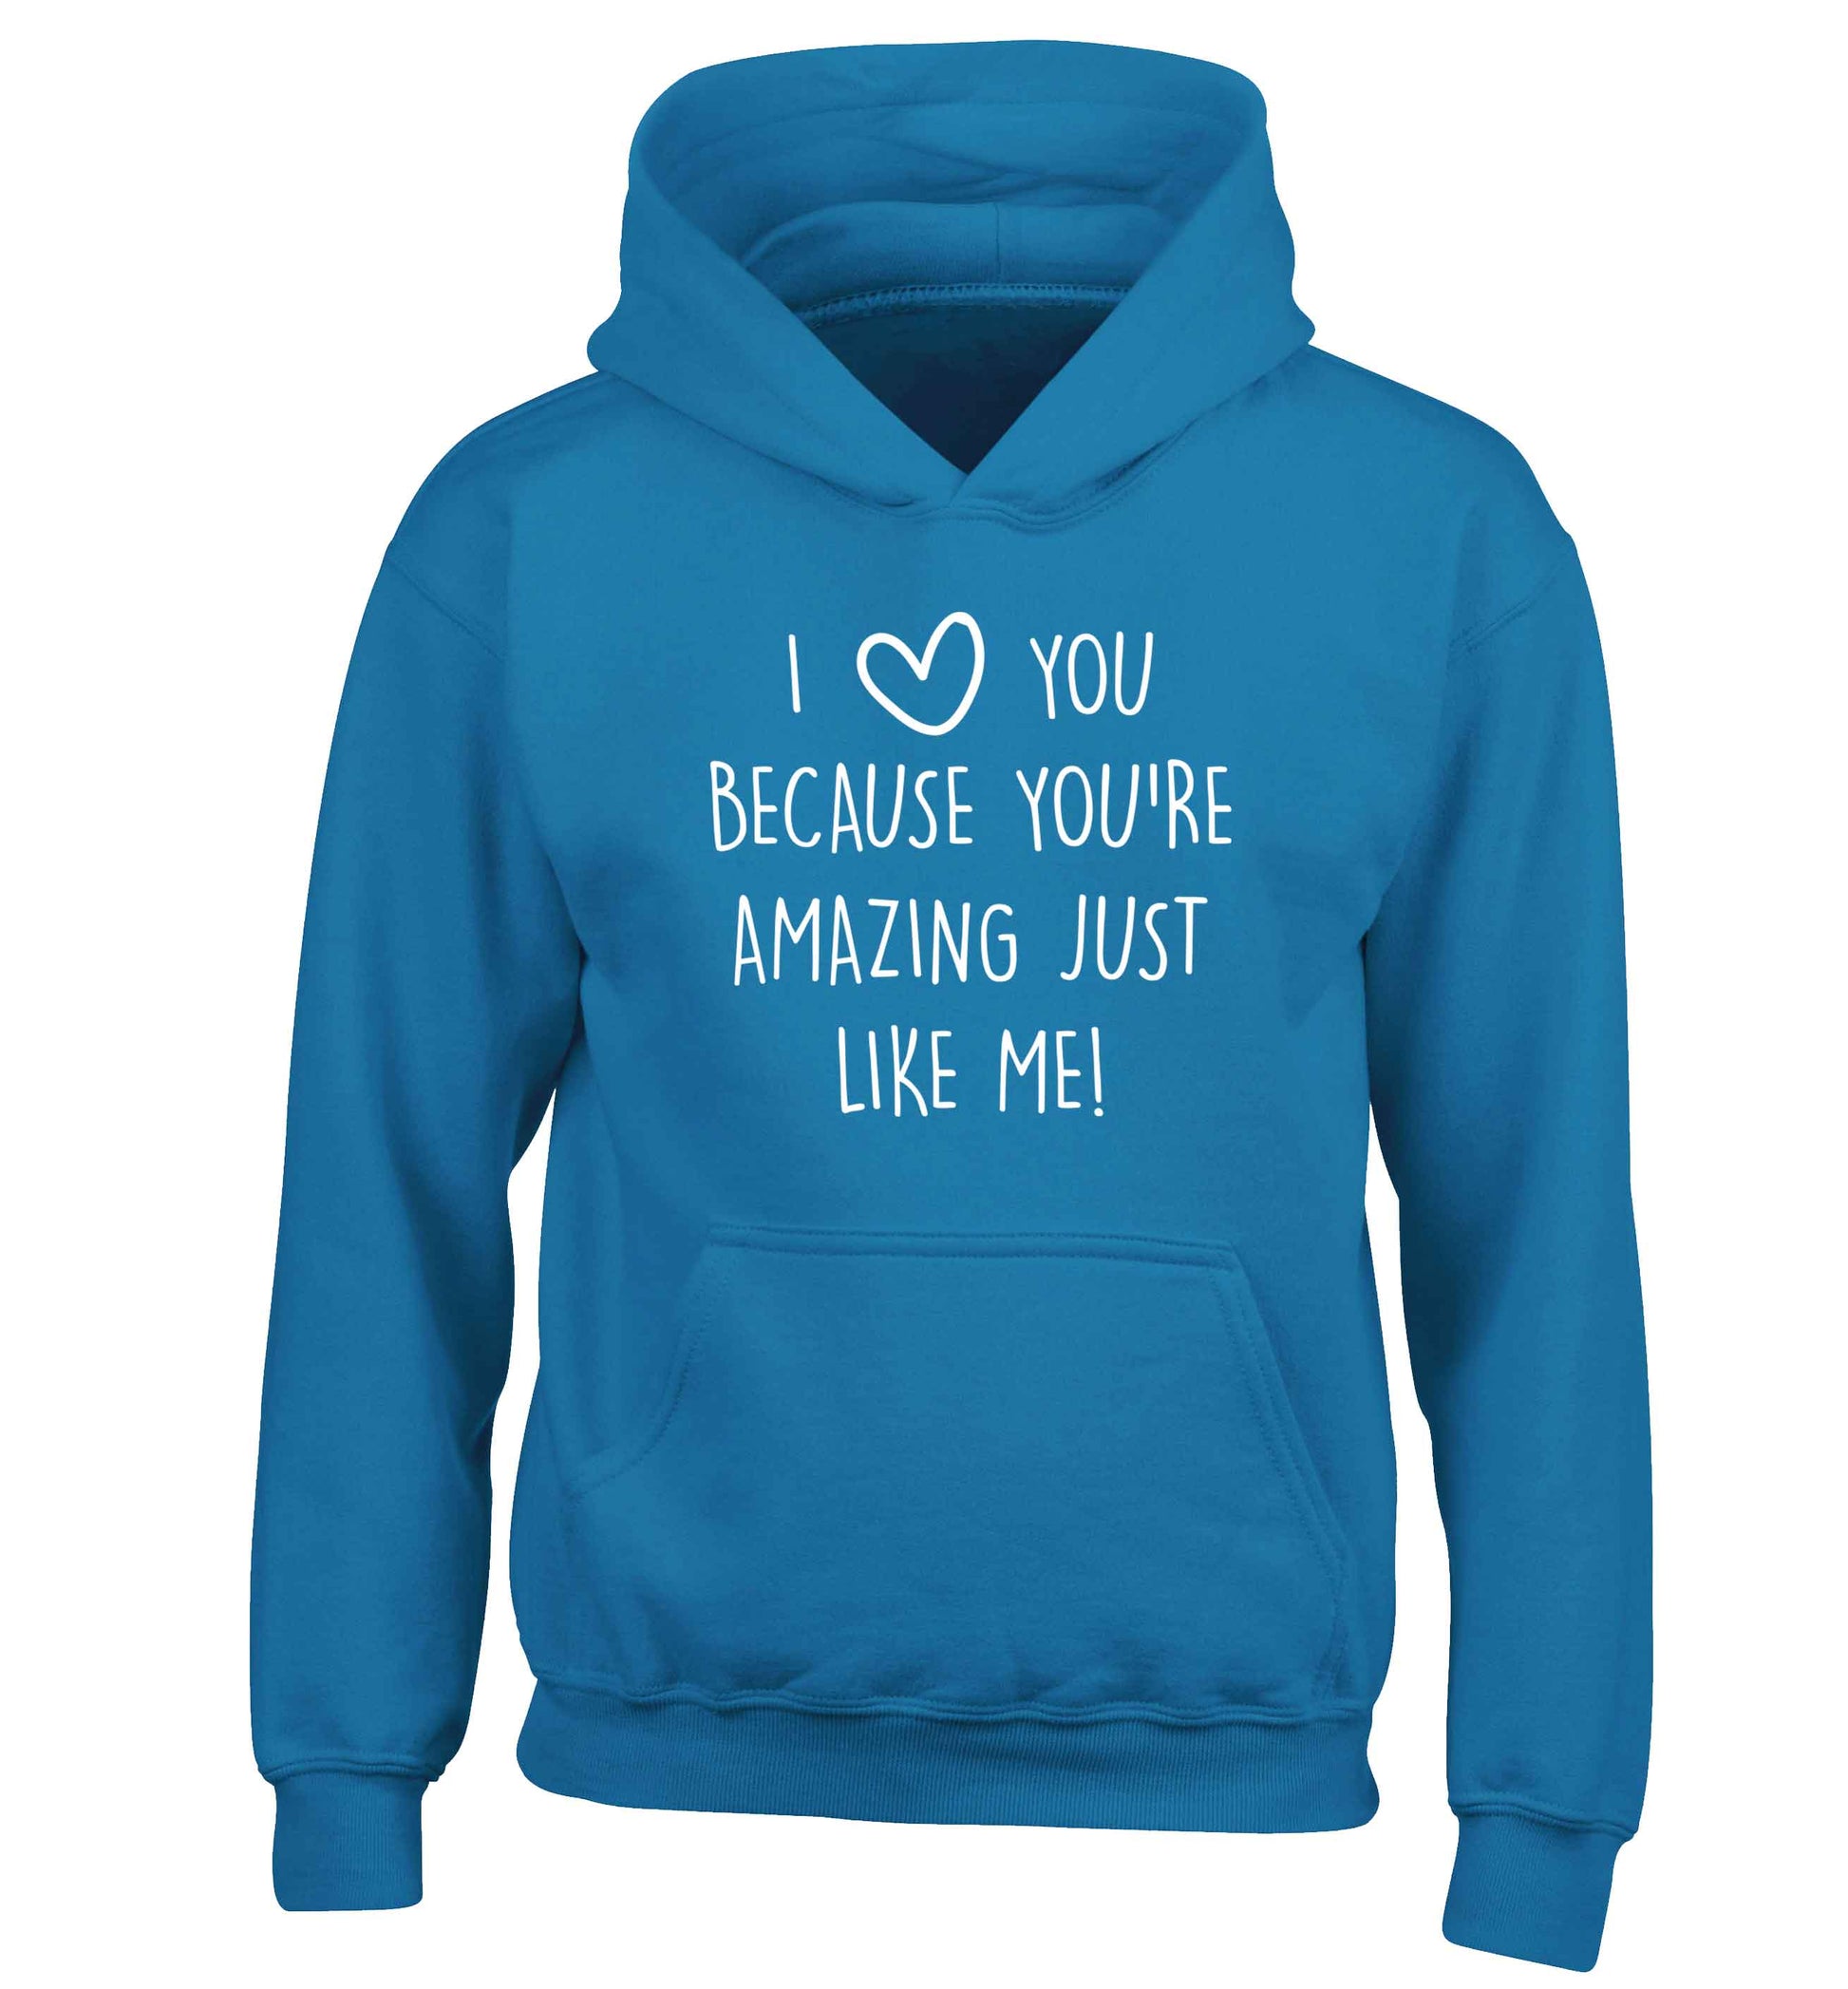 I love you because you're amazing just like me children's blue hoodie 12-13 Years